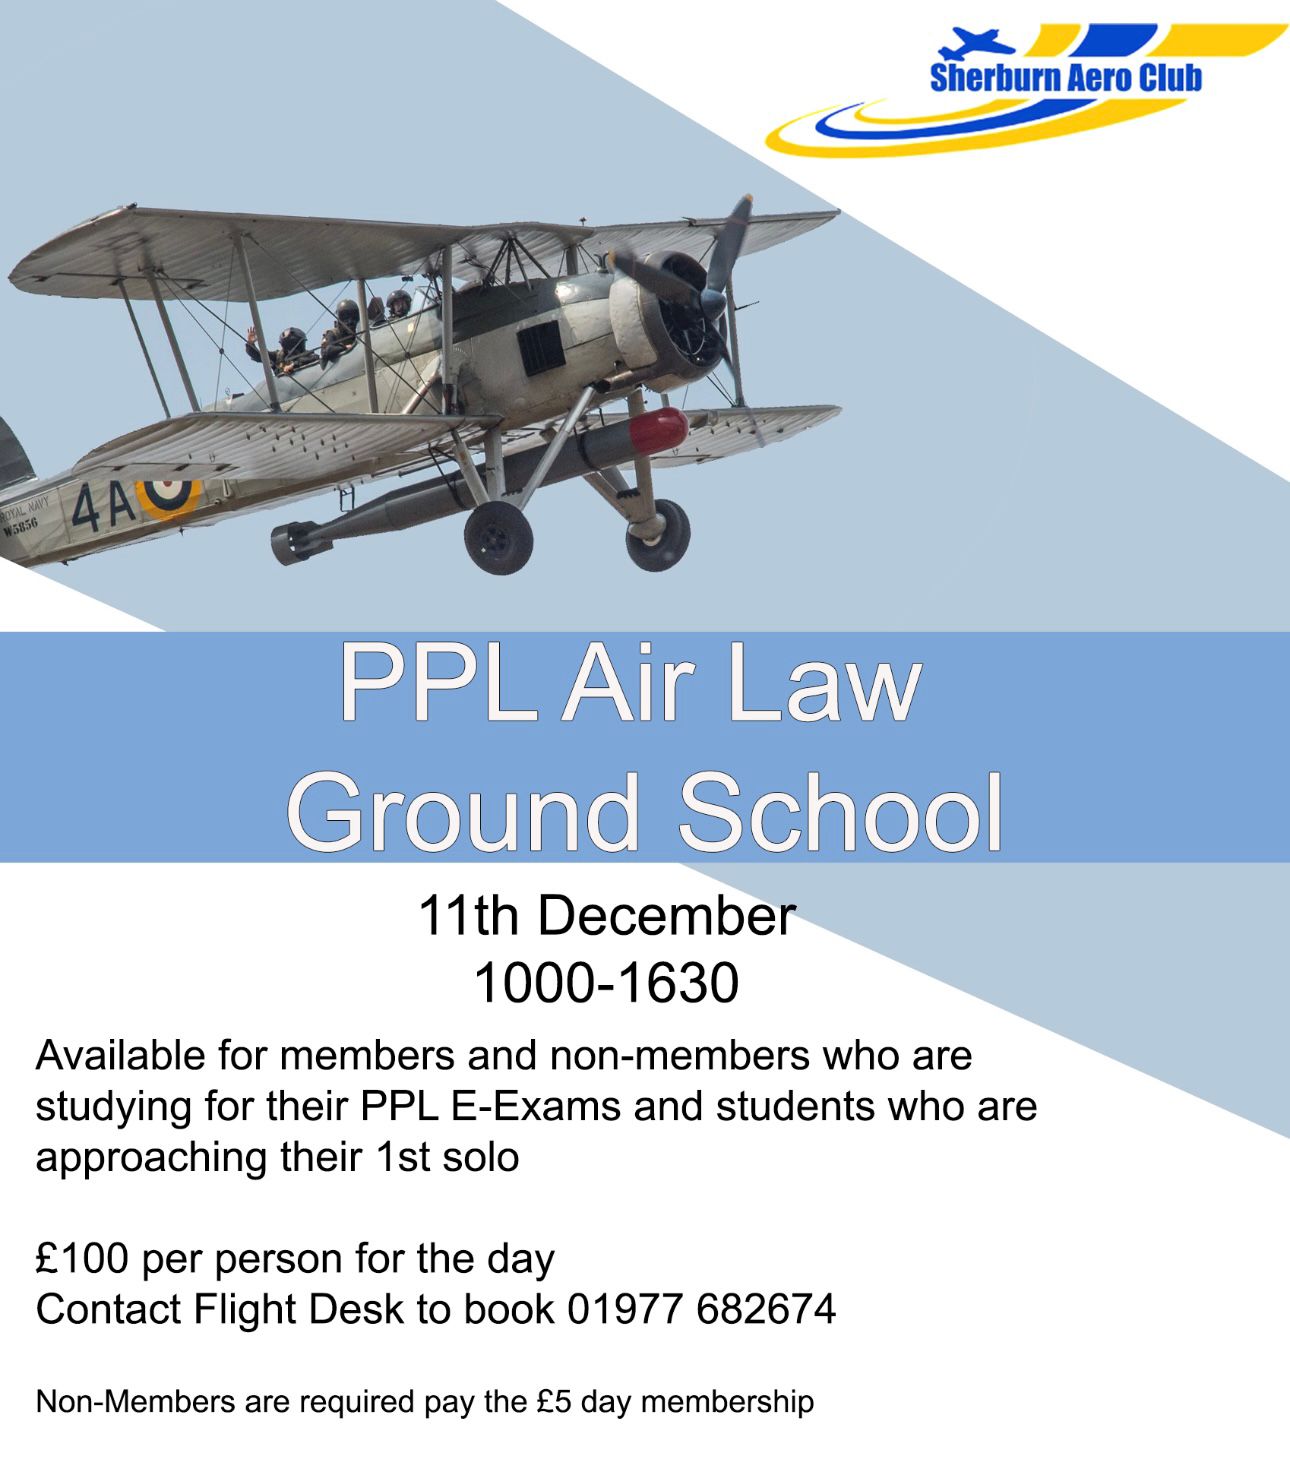 Available to members and non-members who are studying for their PPL E-exams and students who are approaching their first solo.
£100 per person for the day. Contact the Flightdesk to book on 01977 682674. * Note non-members are required to pay the £5 day membership.